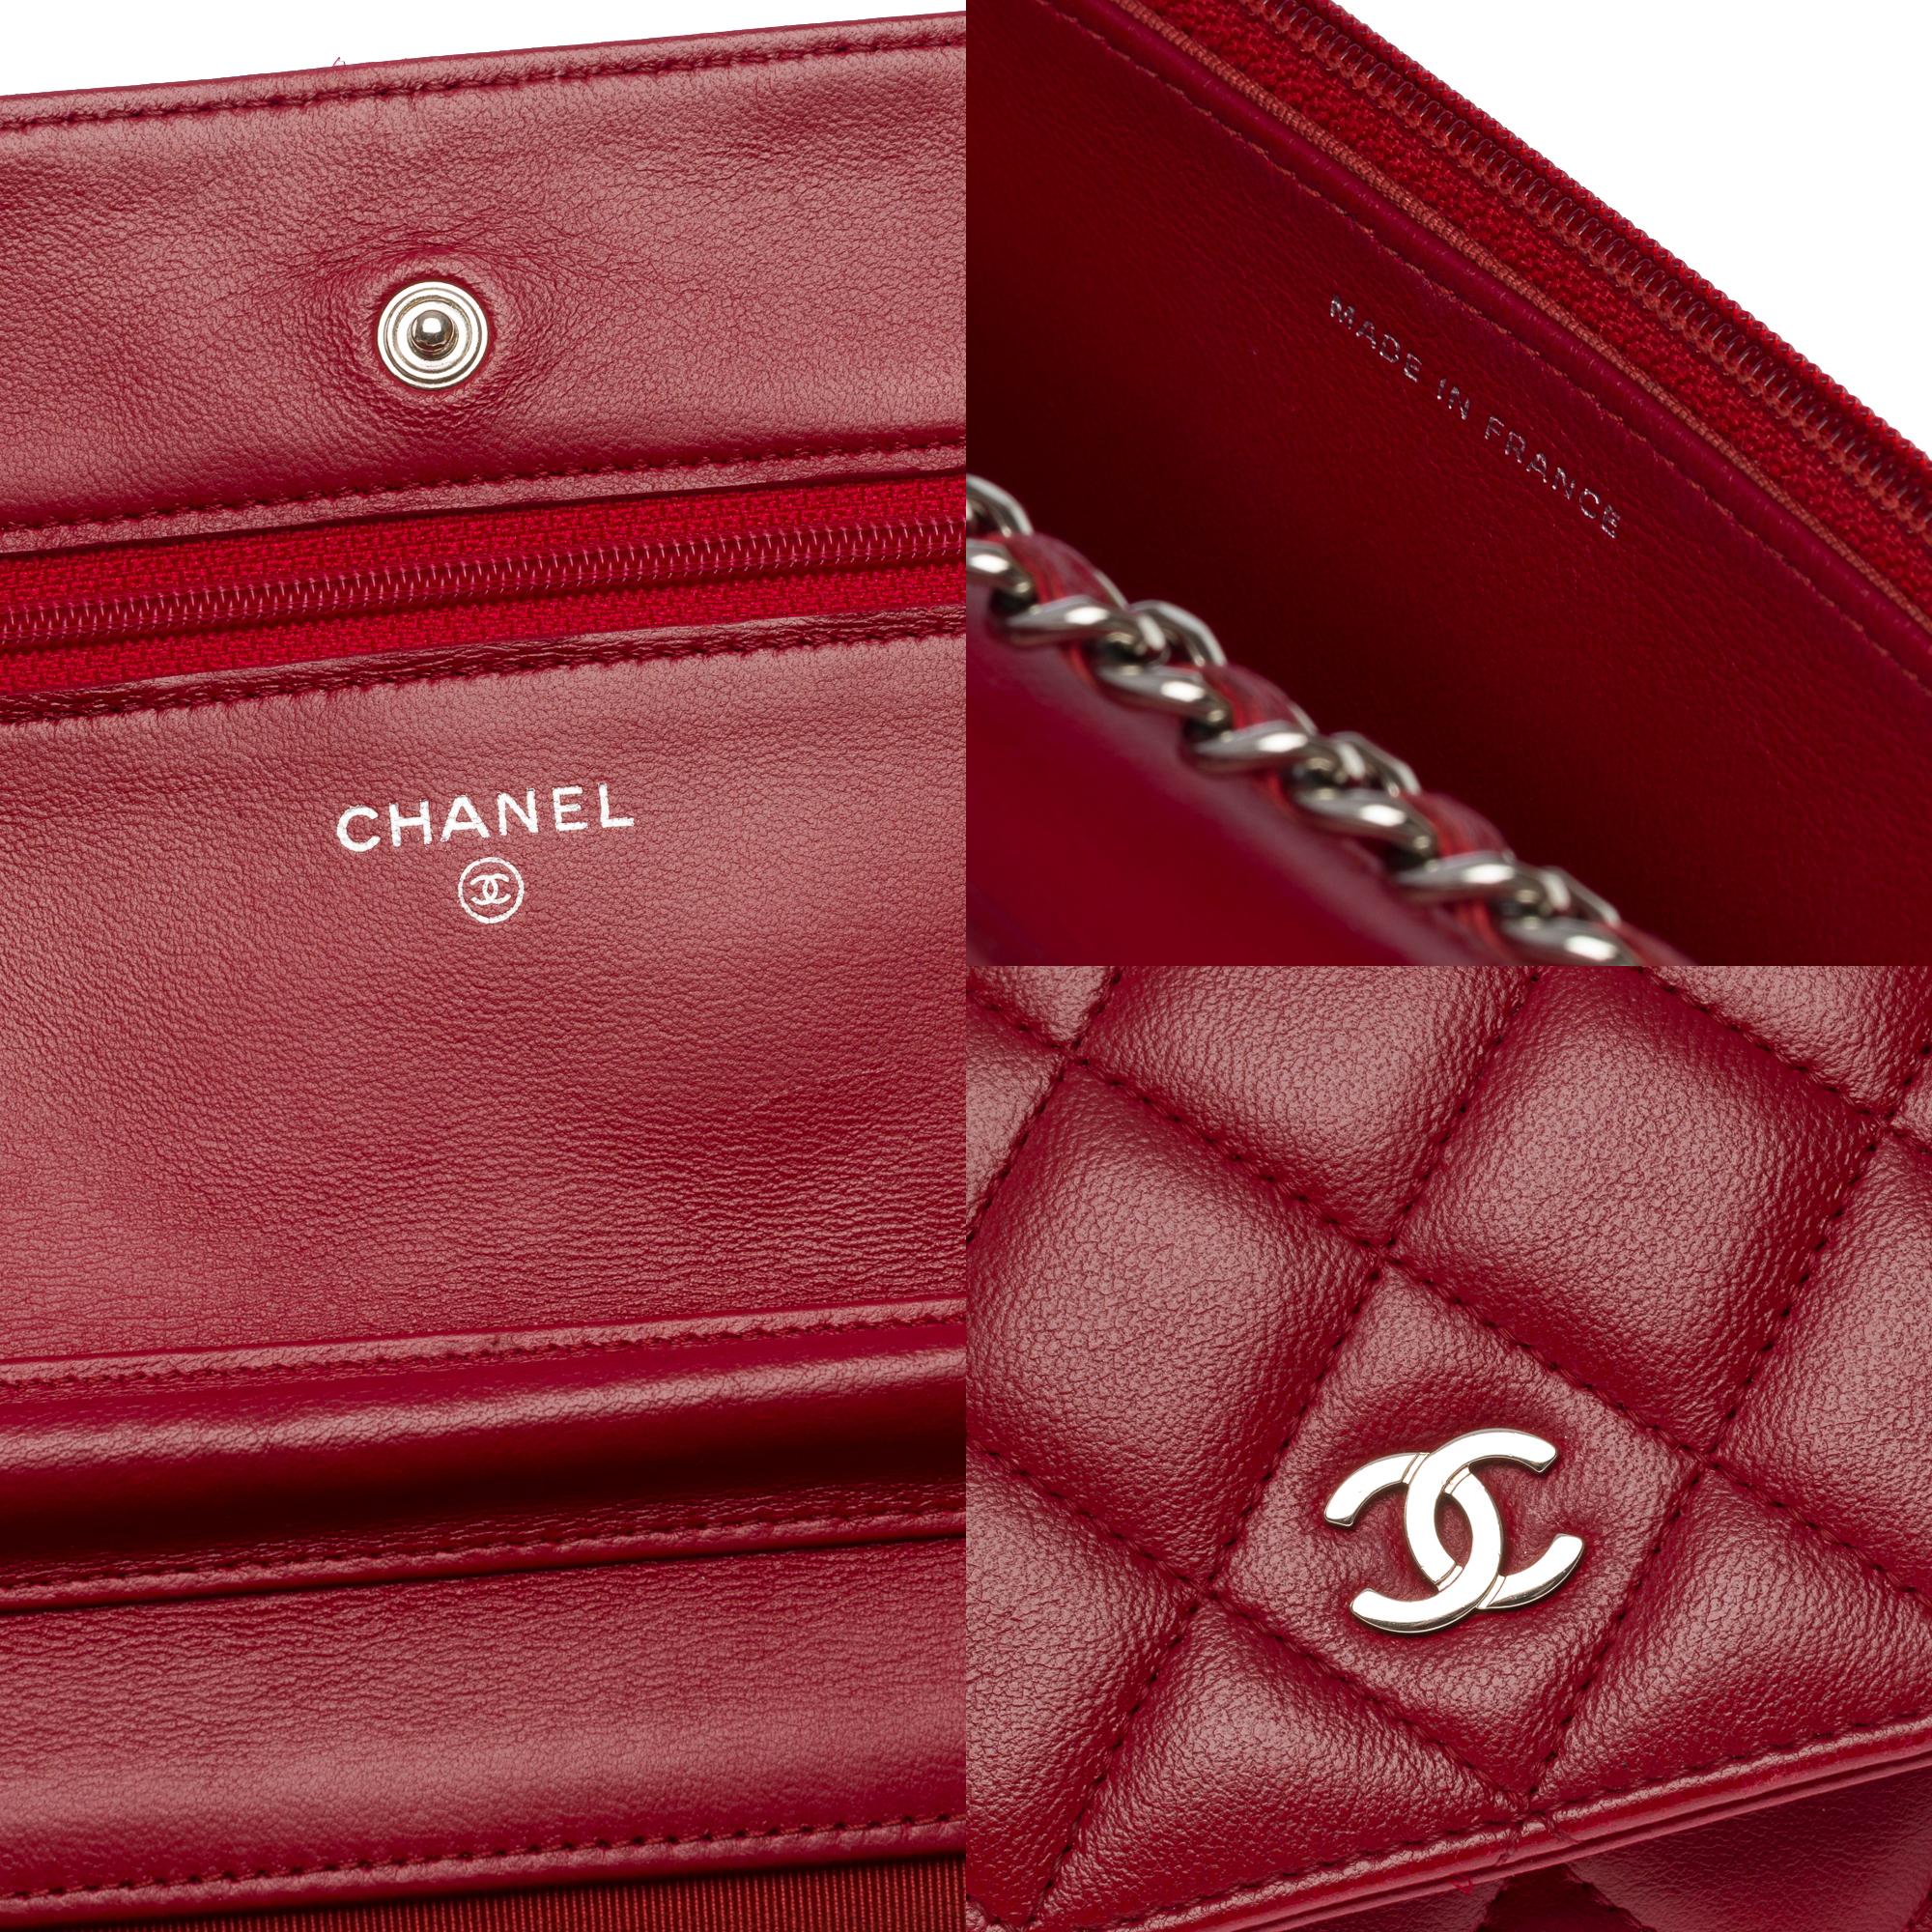 Chanel Wallet on Chain (WOC)  shoulder bag in Red quilted lambskin leather, GHW 2